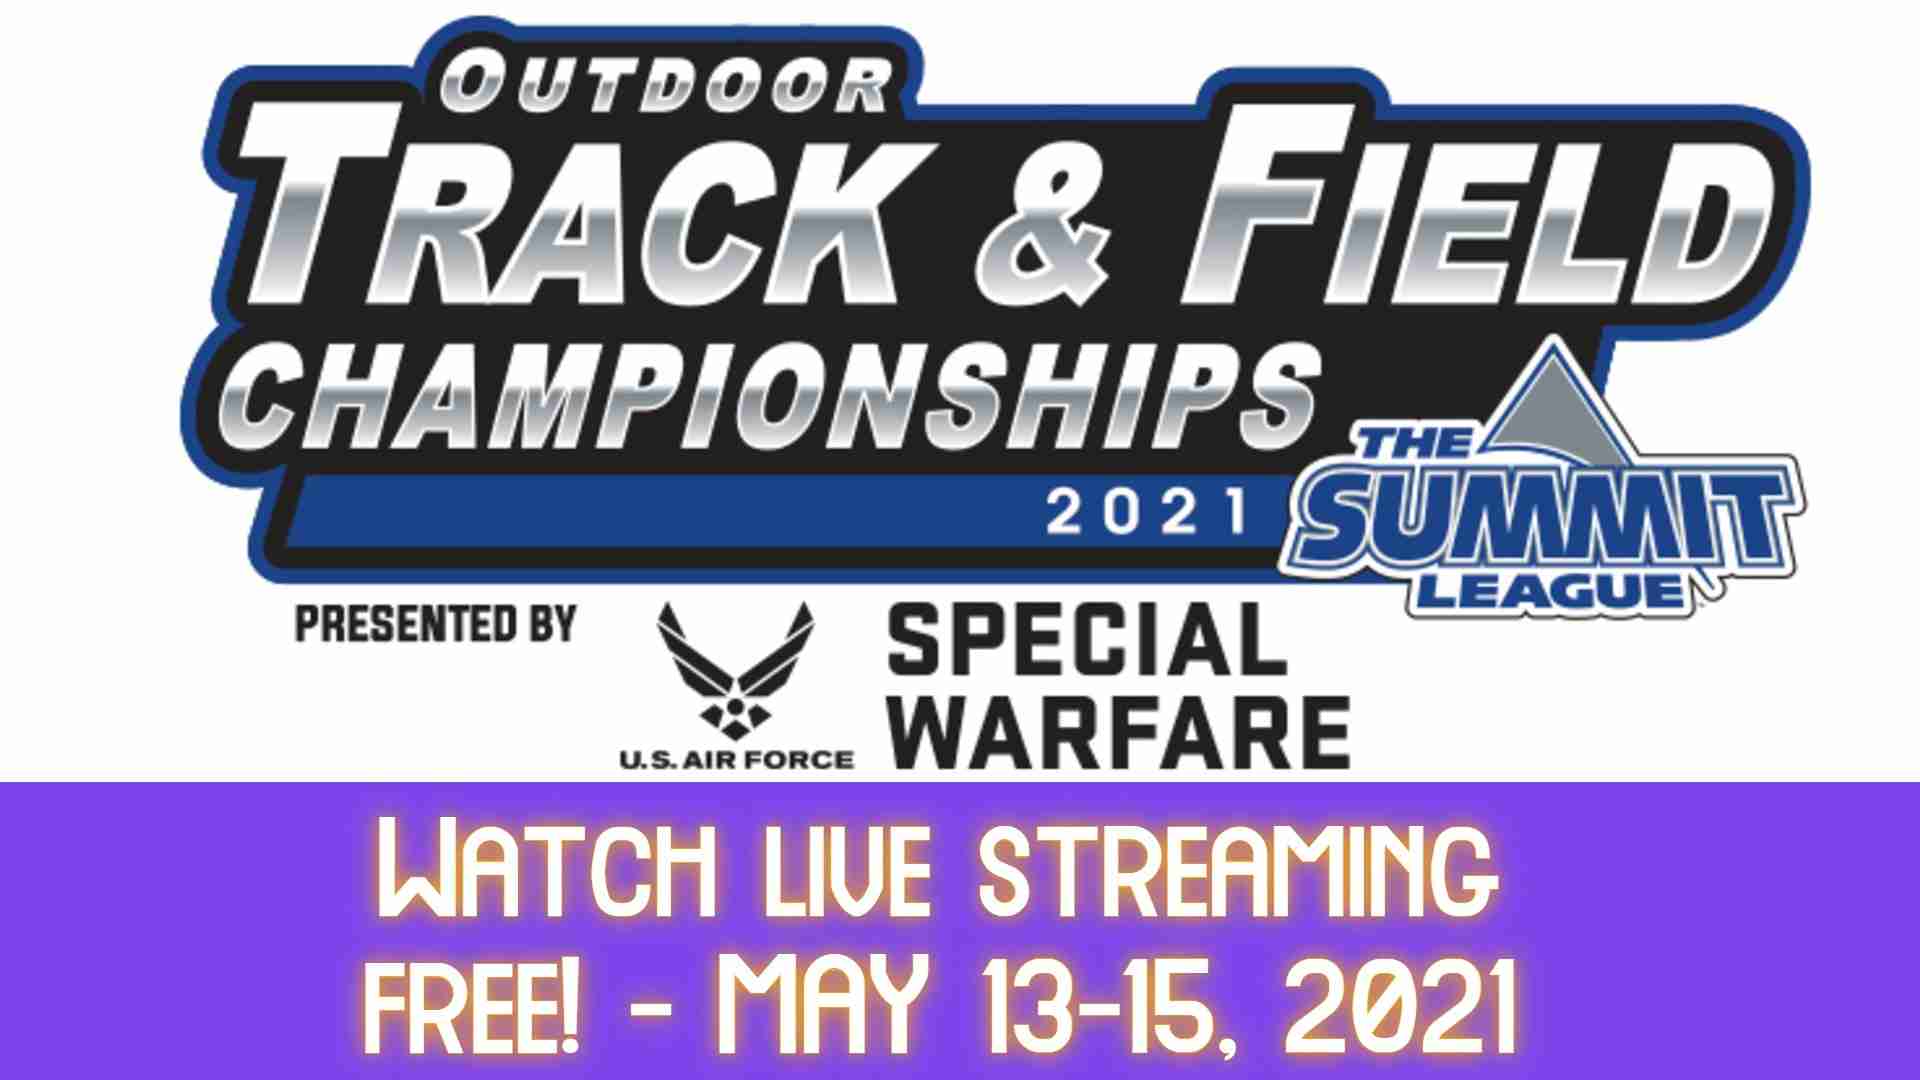 How_To_Watch_2021_Summit_League_Outdoor_Championships